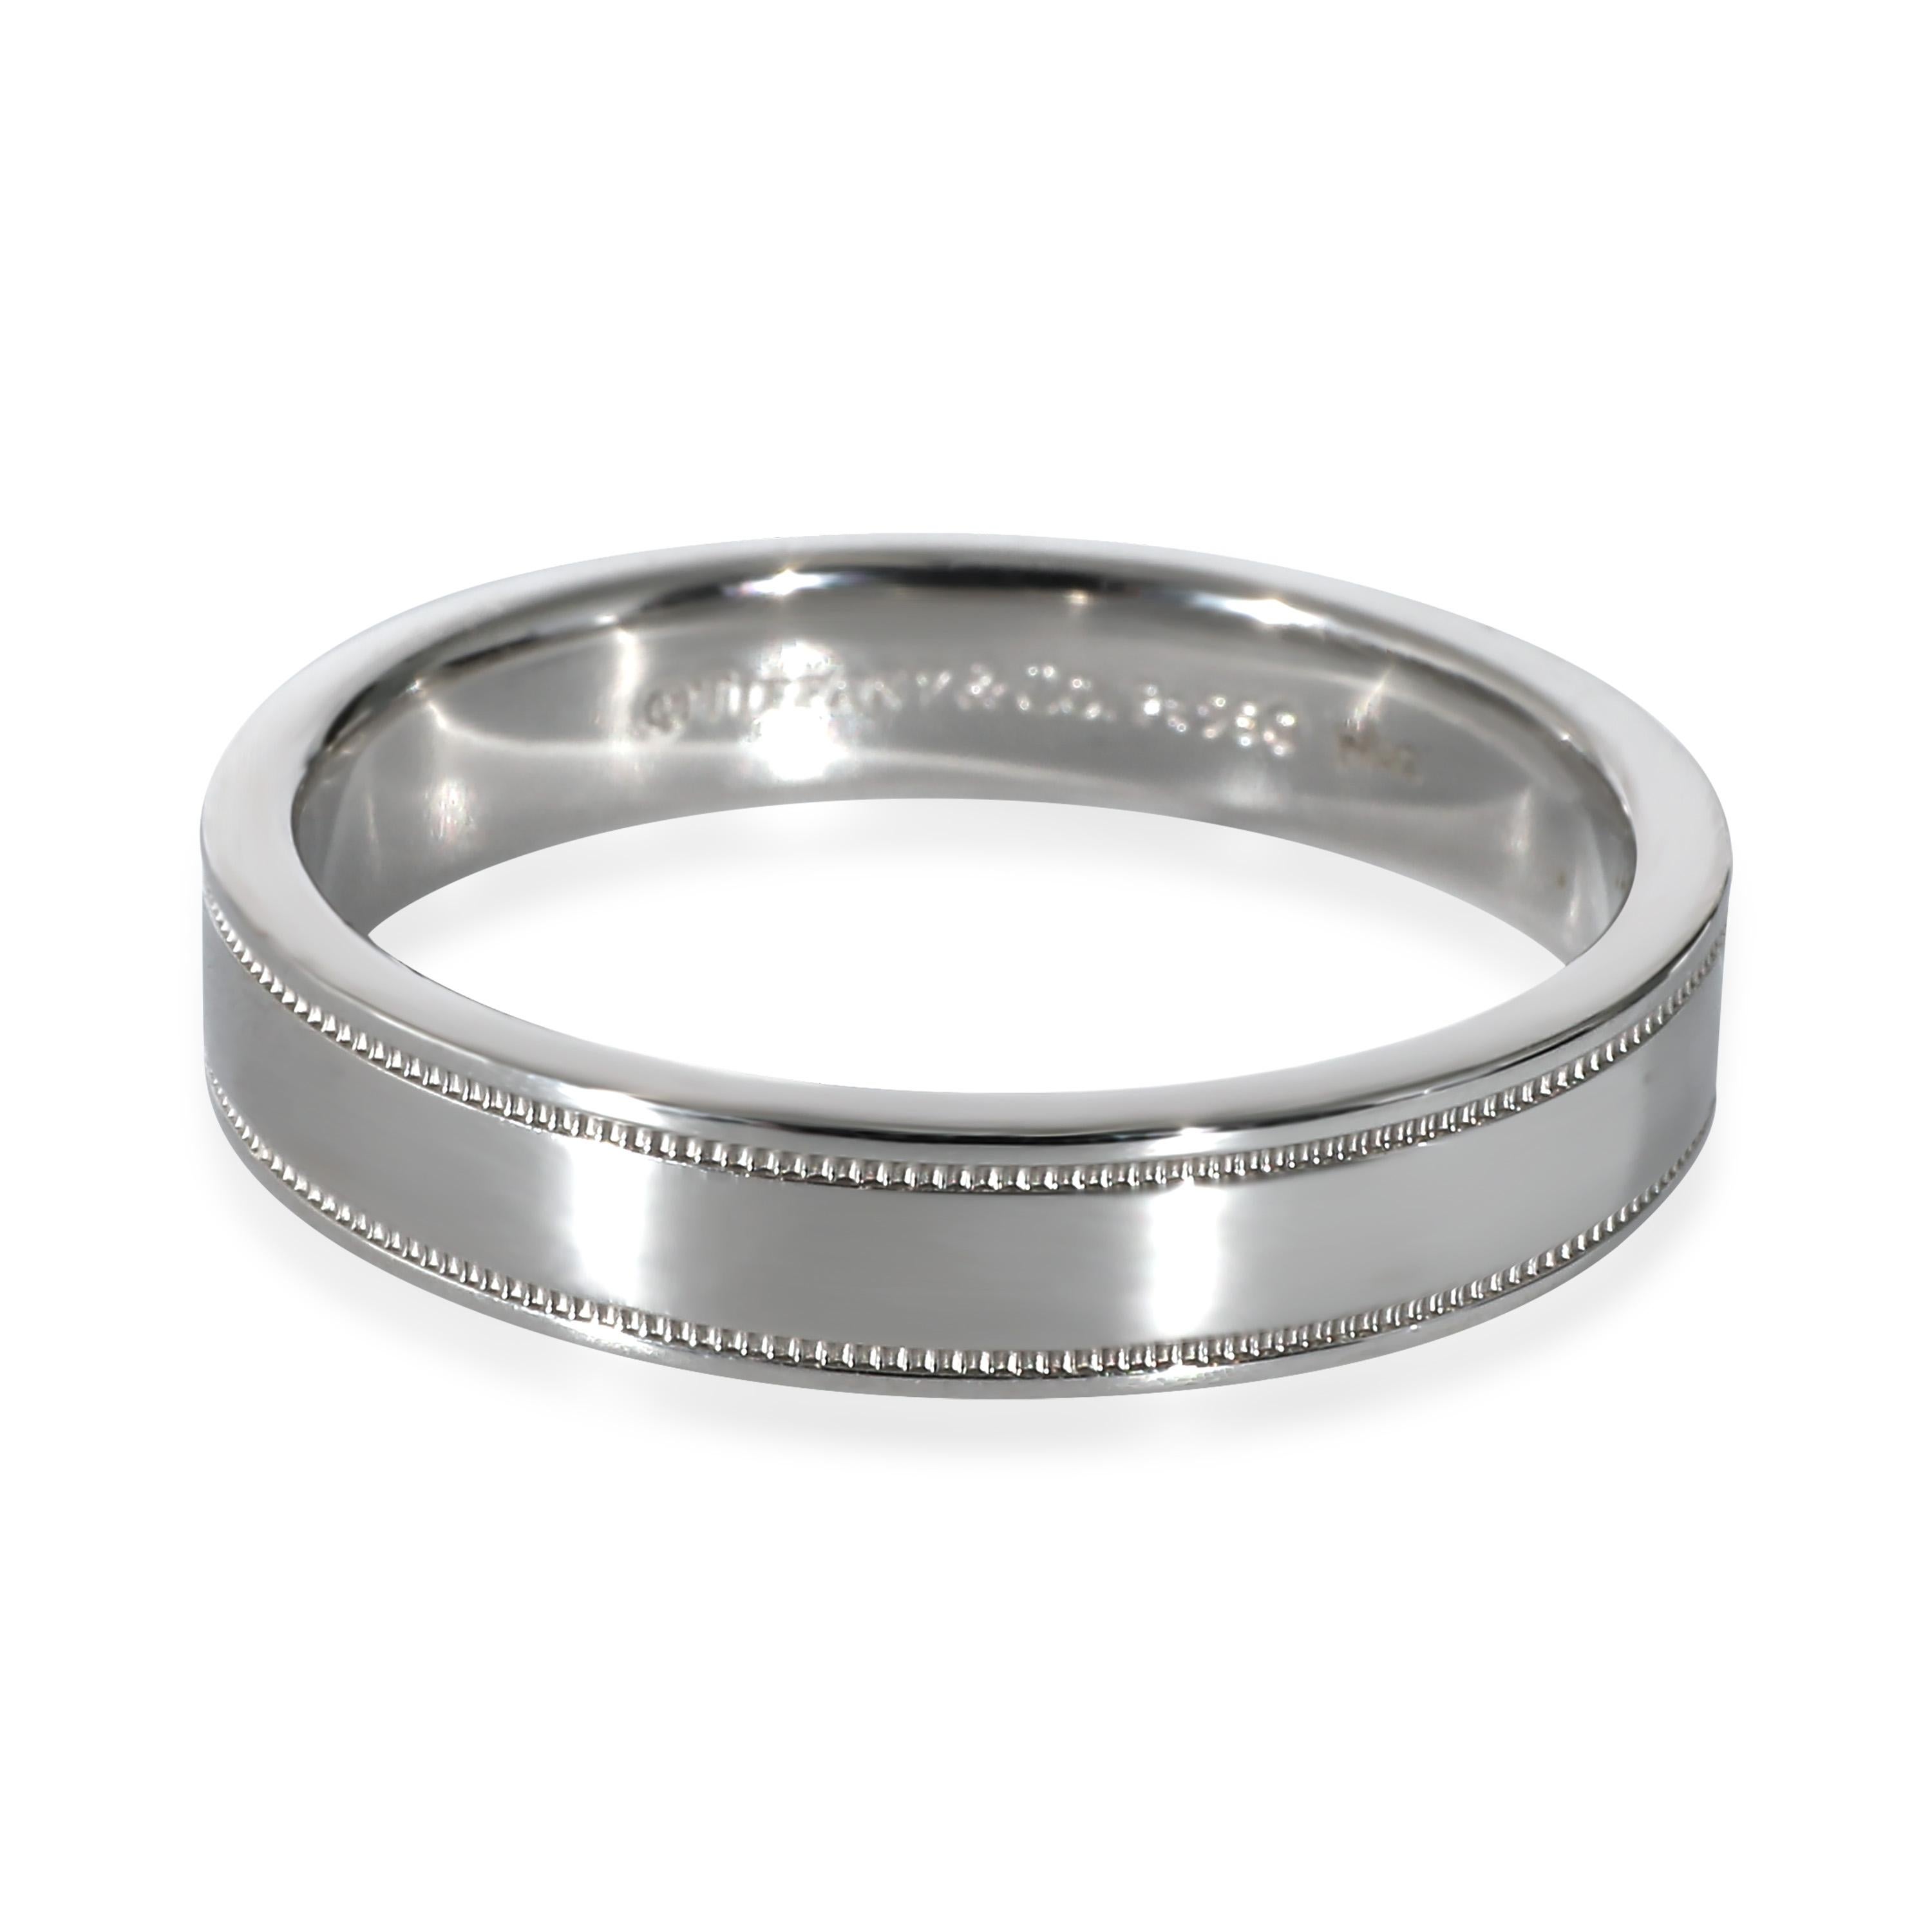 Tiffany & Co. Together Double Migrain Diamond Band in Platinum 0.01 CTW

PRIMARY DETAILS
SKU: 135677
Listing Title: Tiffany & Co. Together Double Migrain Diamond Band in Platinum 0.01 CTW
Condition Description: Tiffany reinvents a classic with the